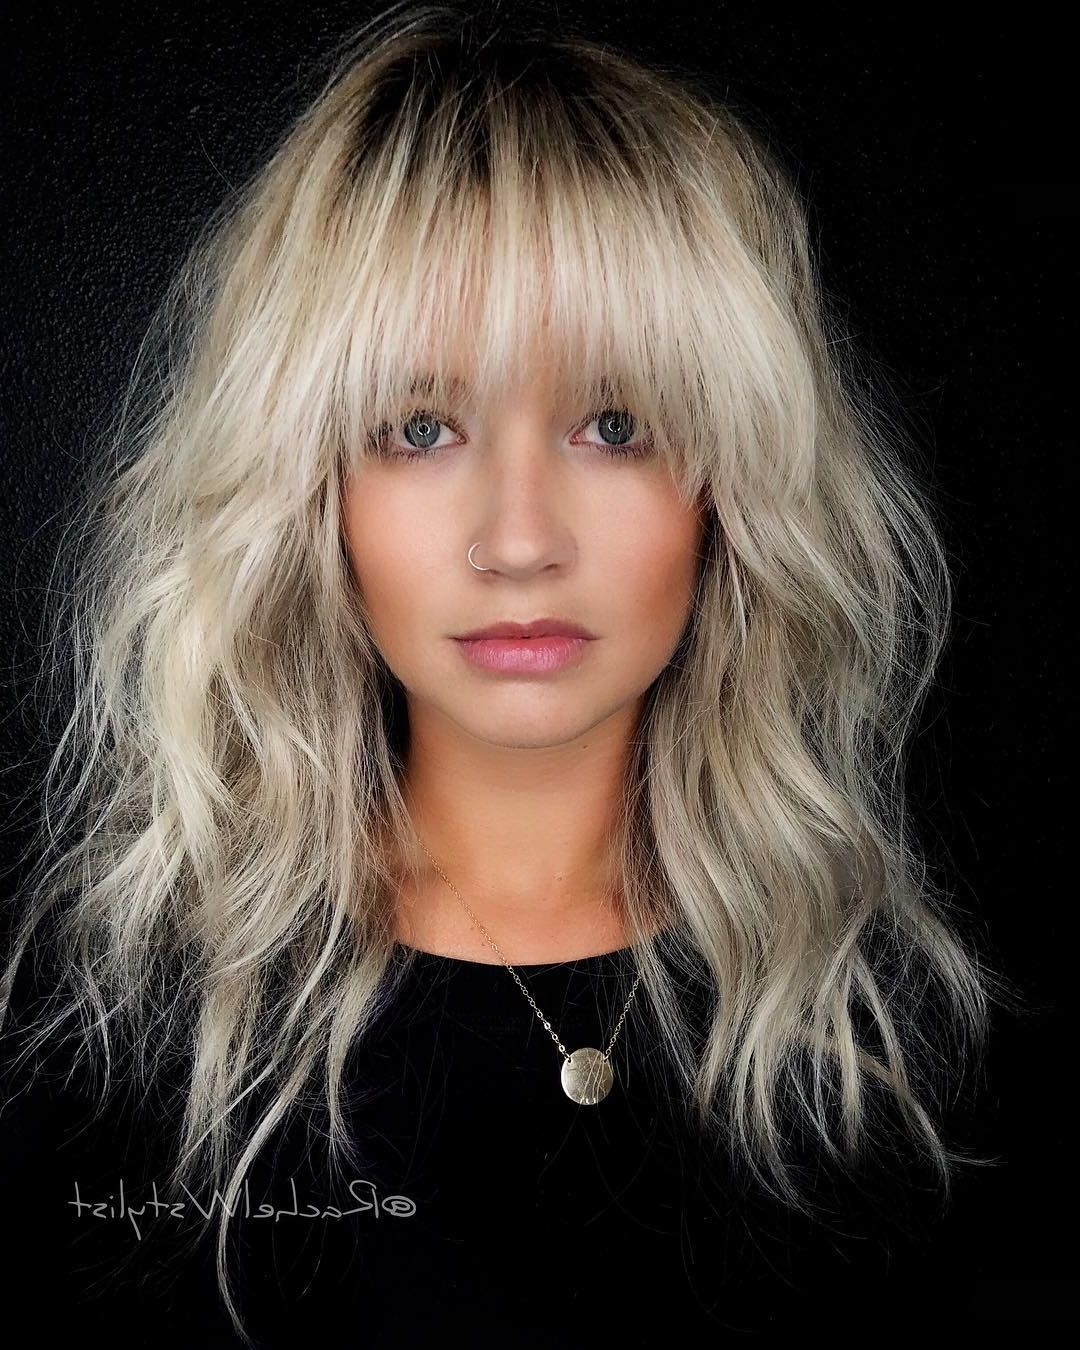 Women's Voluminous Blonde Layered Lob With Face Framing With Most Recent Full Fringe And Face Framing Layers Hairstyles (View 10 of 20)